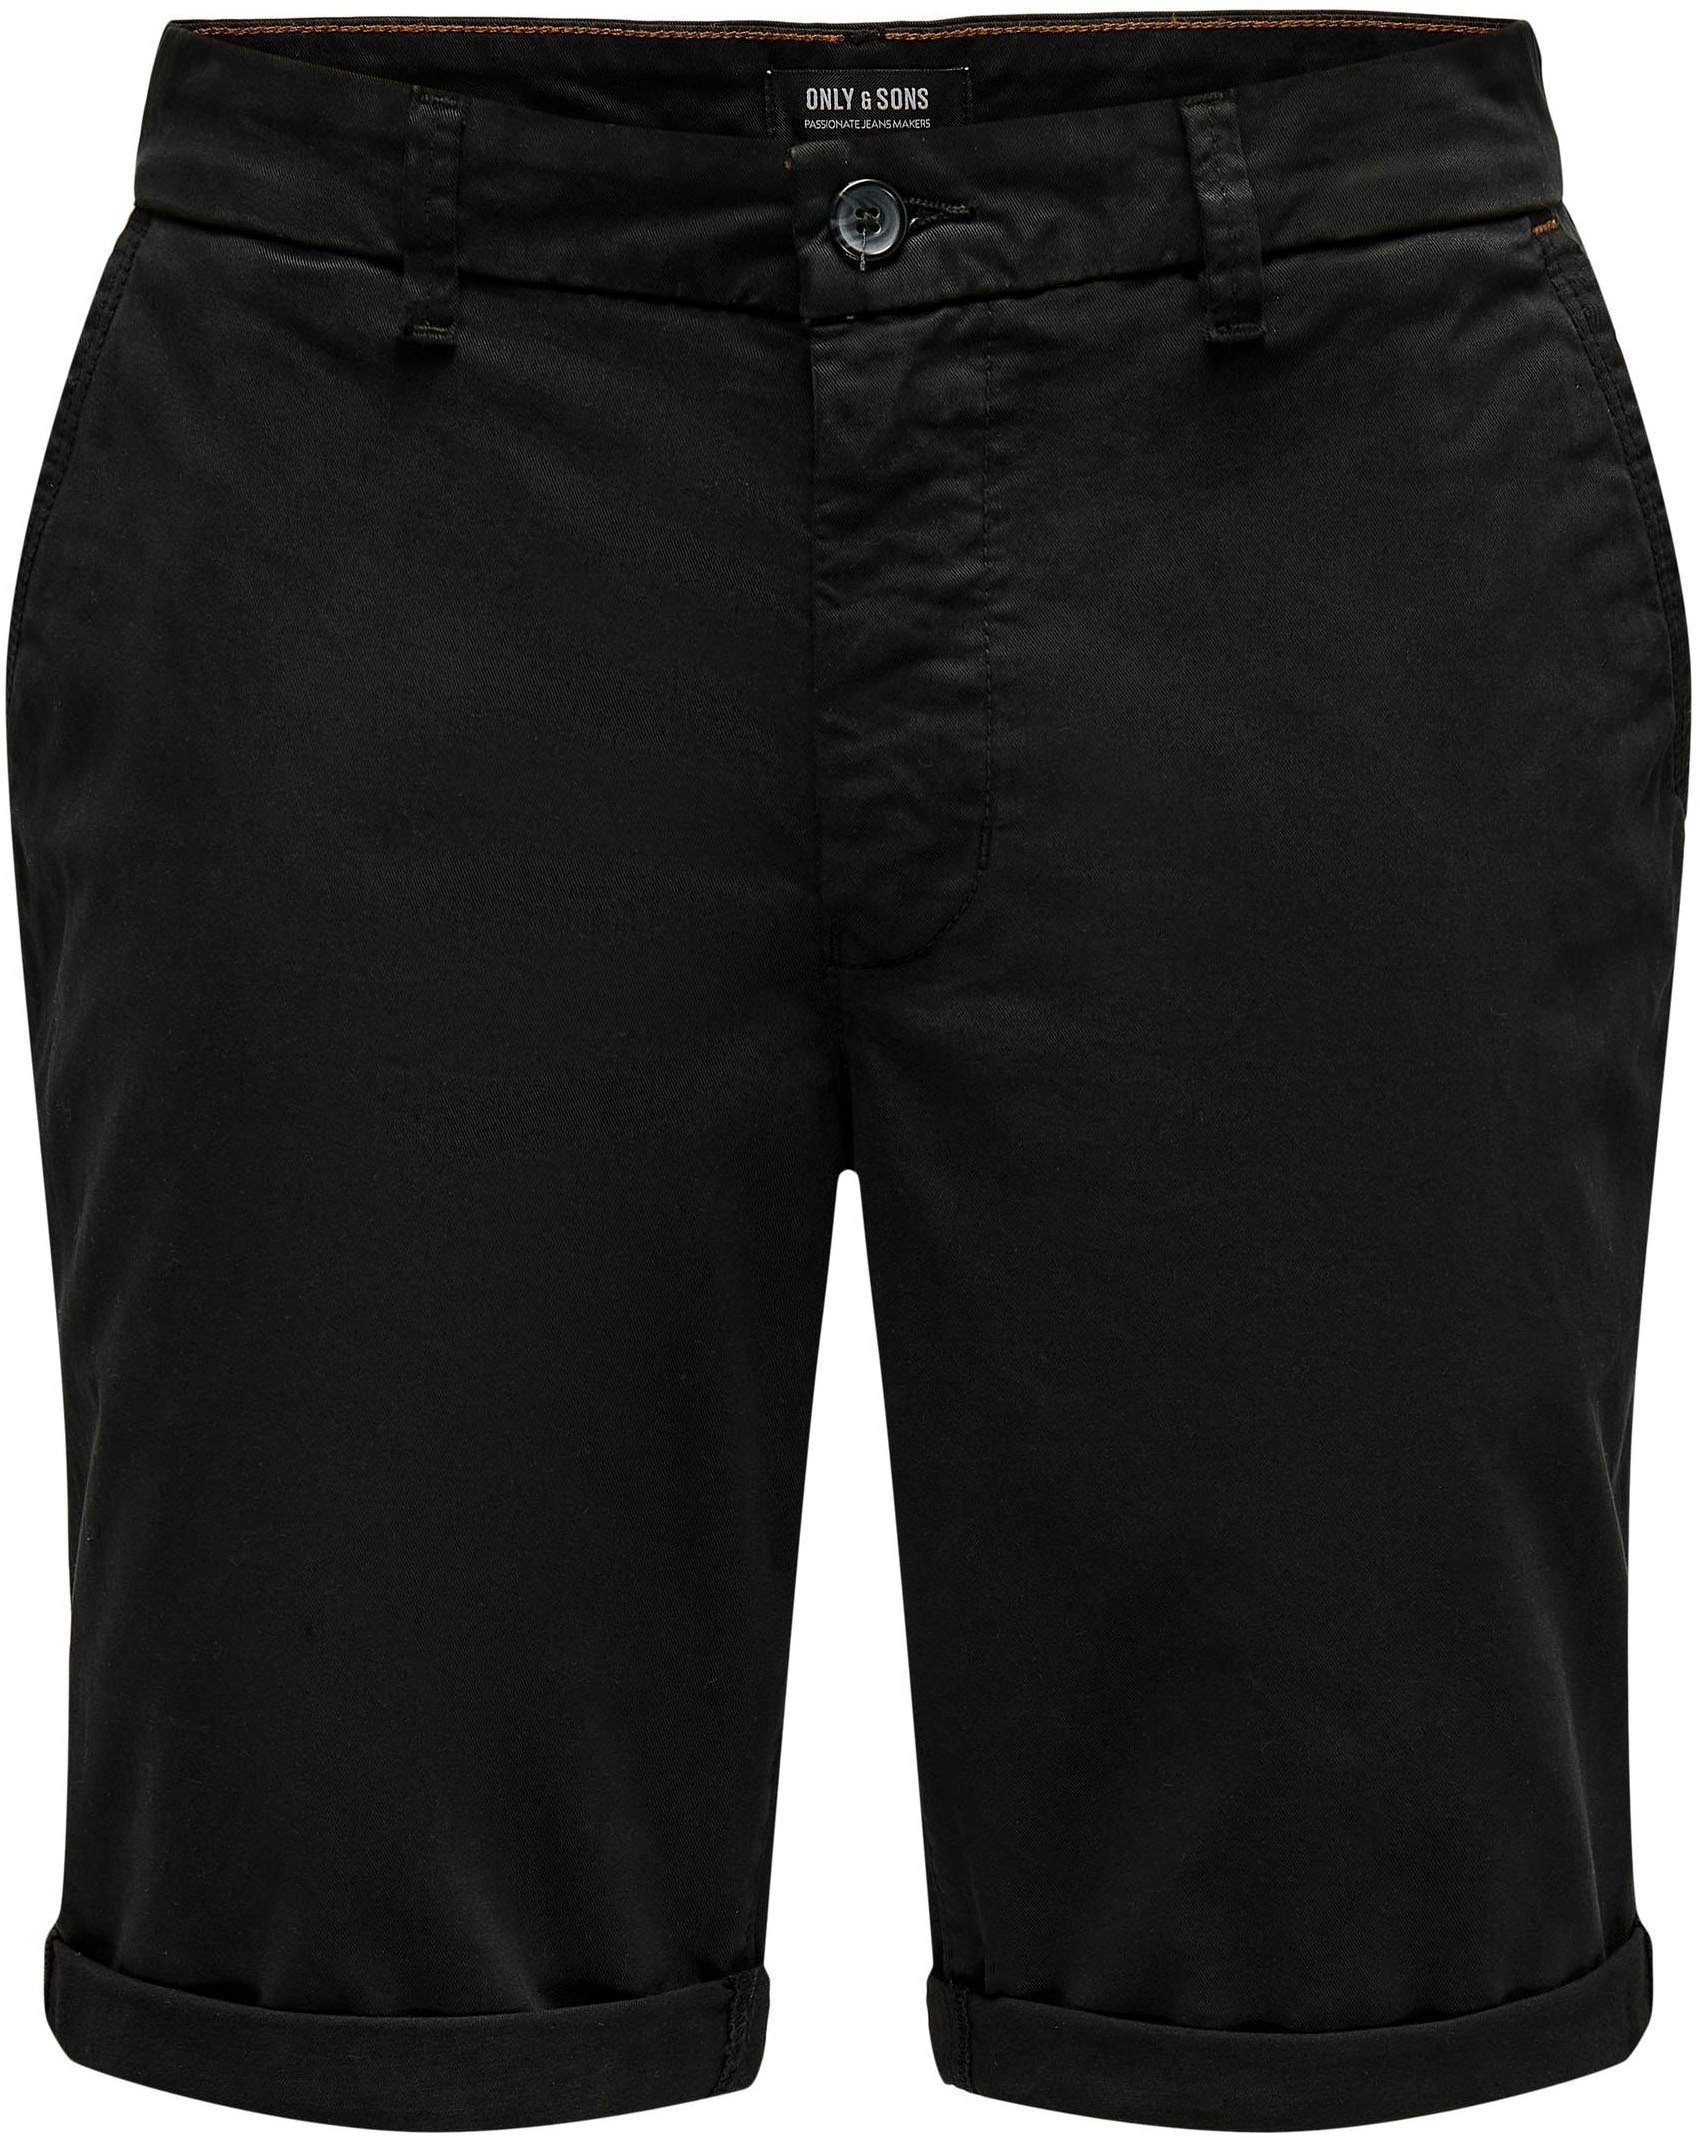 REG 4481 TWILL Jeansshorts SHORTS & NOOS Black ONLY SONS ONSPETER